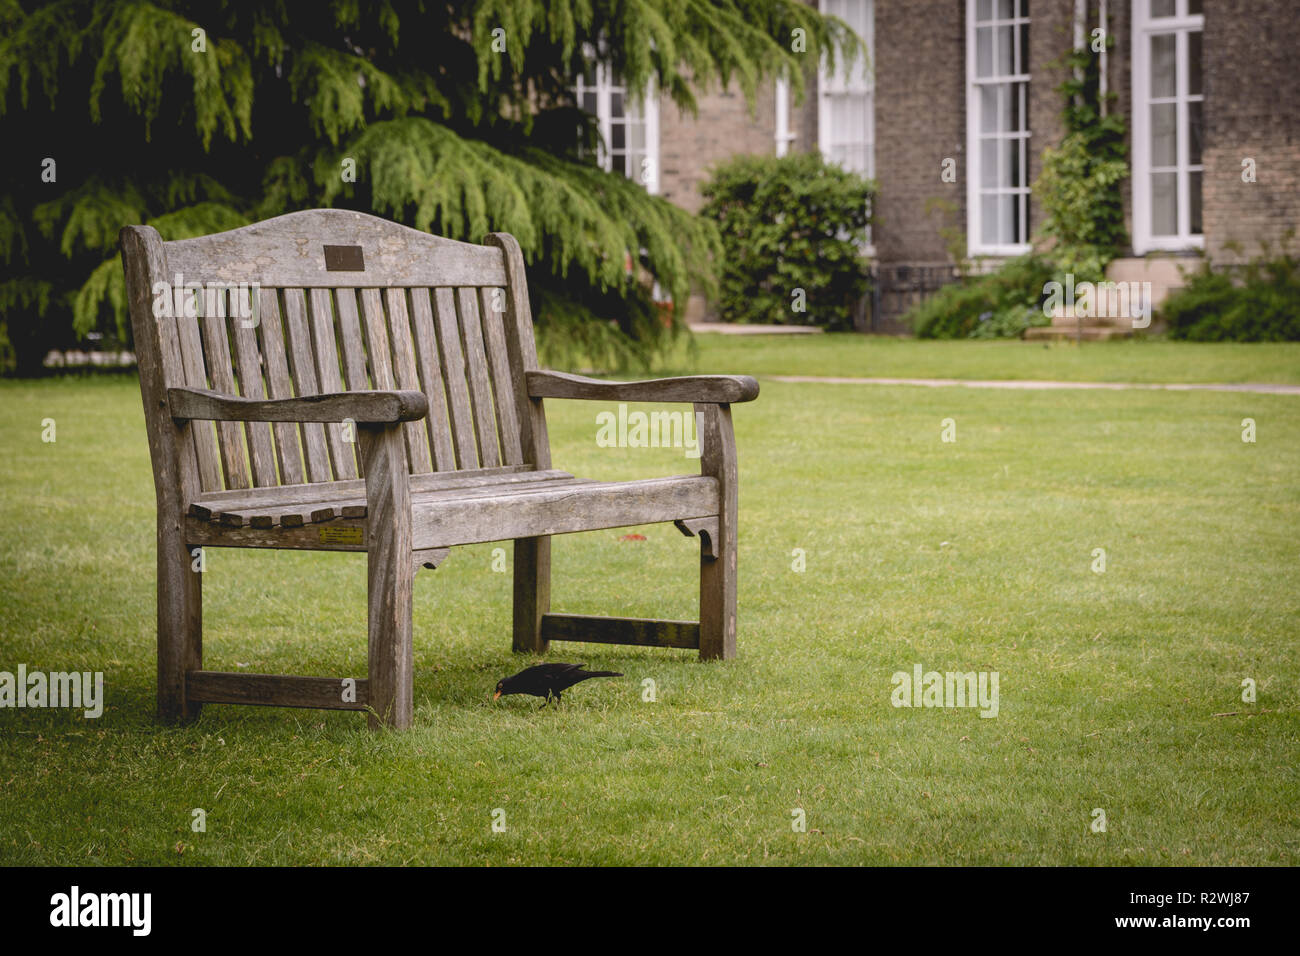 Cambridge, UK - February, 2019. Empty benches in the garden of the Downing College, a constituent college of the University of Cambridge. Stock Photo